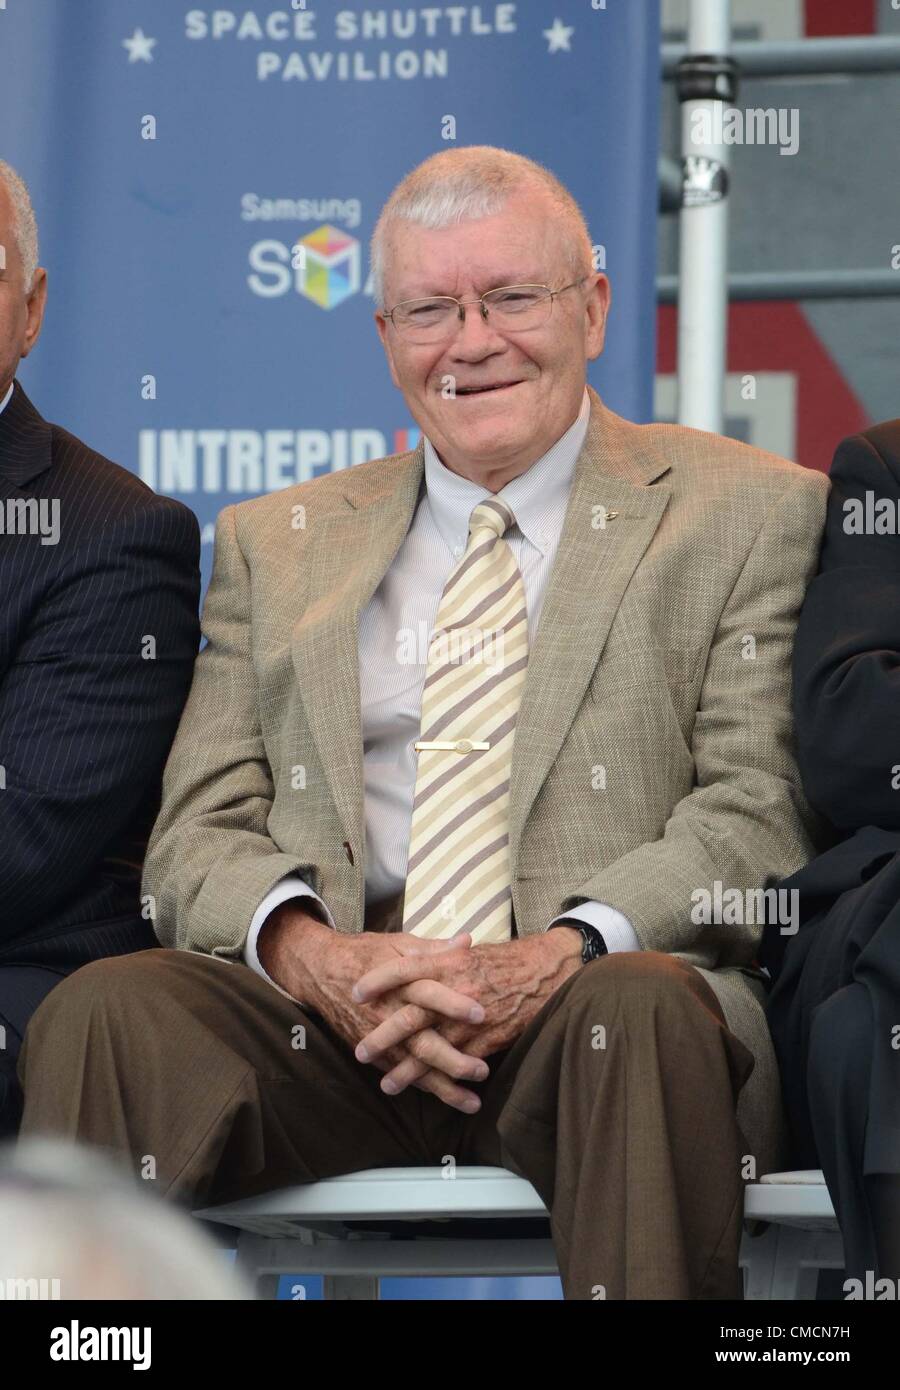 Thursday 19th July 2012. New York, USA. Fred Haise, Apollo 13, Original Enterprise in attendance for Intrepid's Space Shuttle Enterprise Pavilion Grand Opening, The Intrepid Sea, Air and Space Museum, New York. Stock Photo